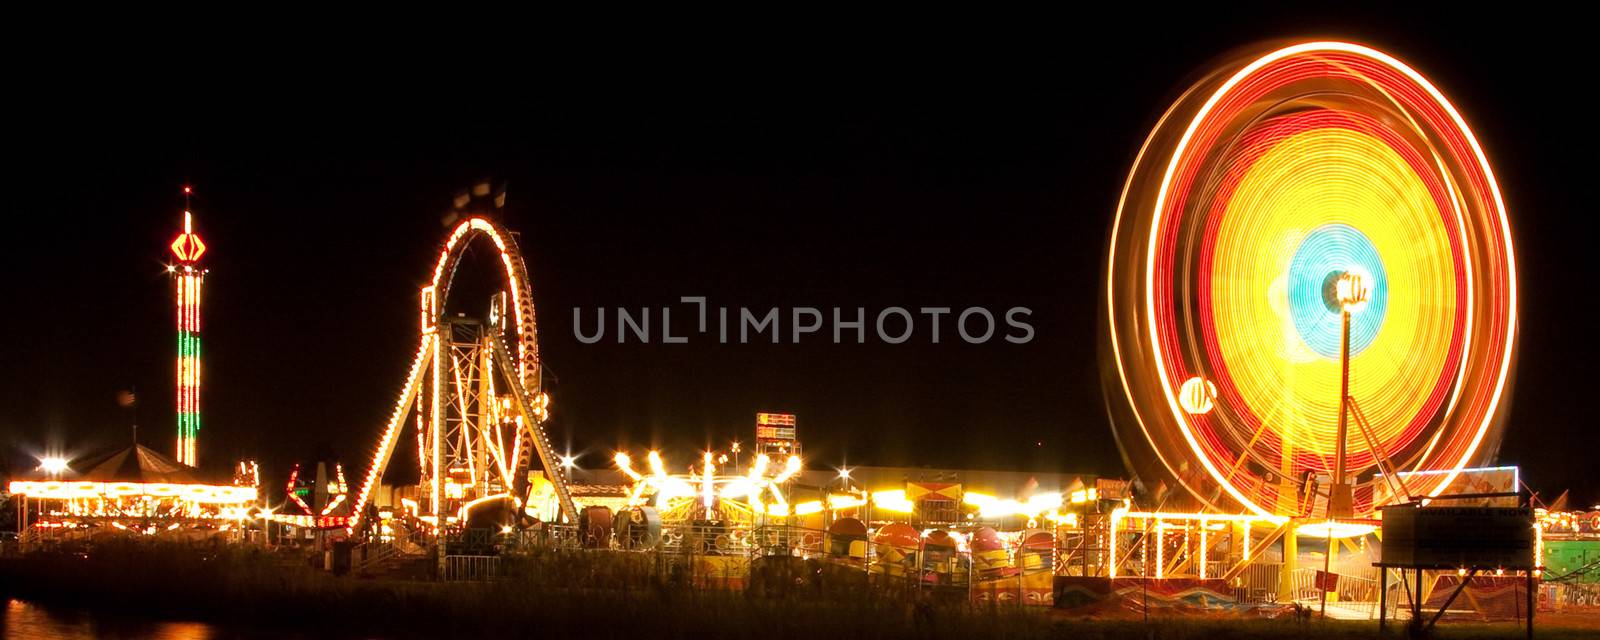 Night shot of a spinning ferris wheel and illuminated rides at a funfair.